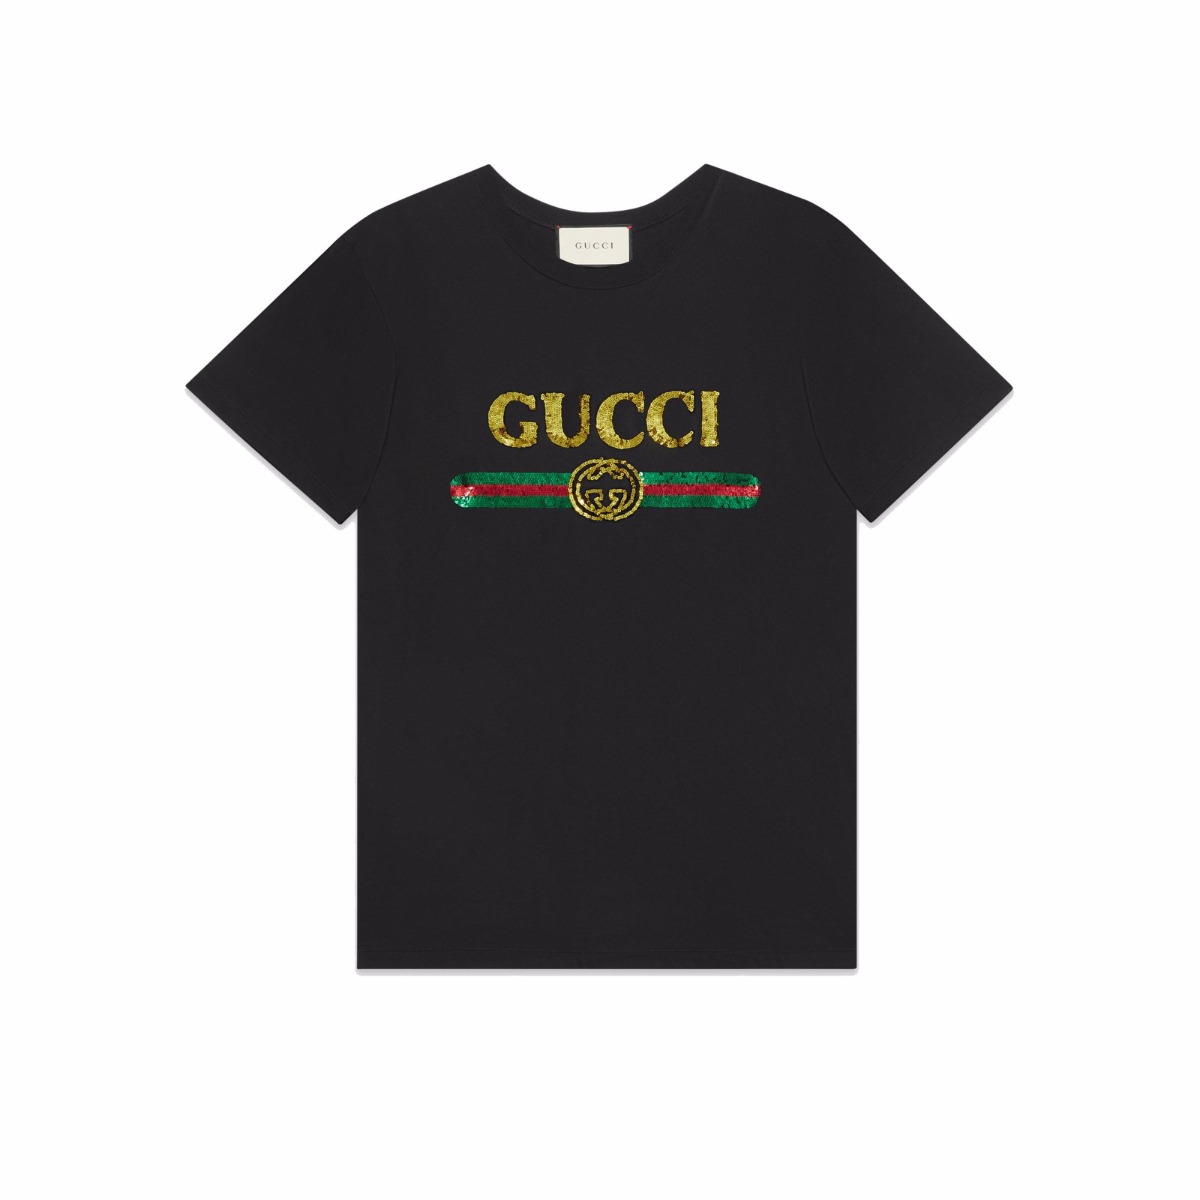 Gucci Women Oversize T-Shirt with Sequin Gucci Logo-Black - LULUX